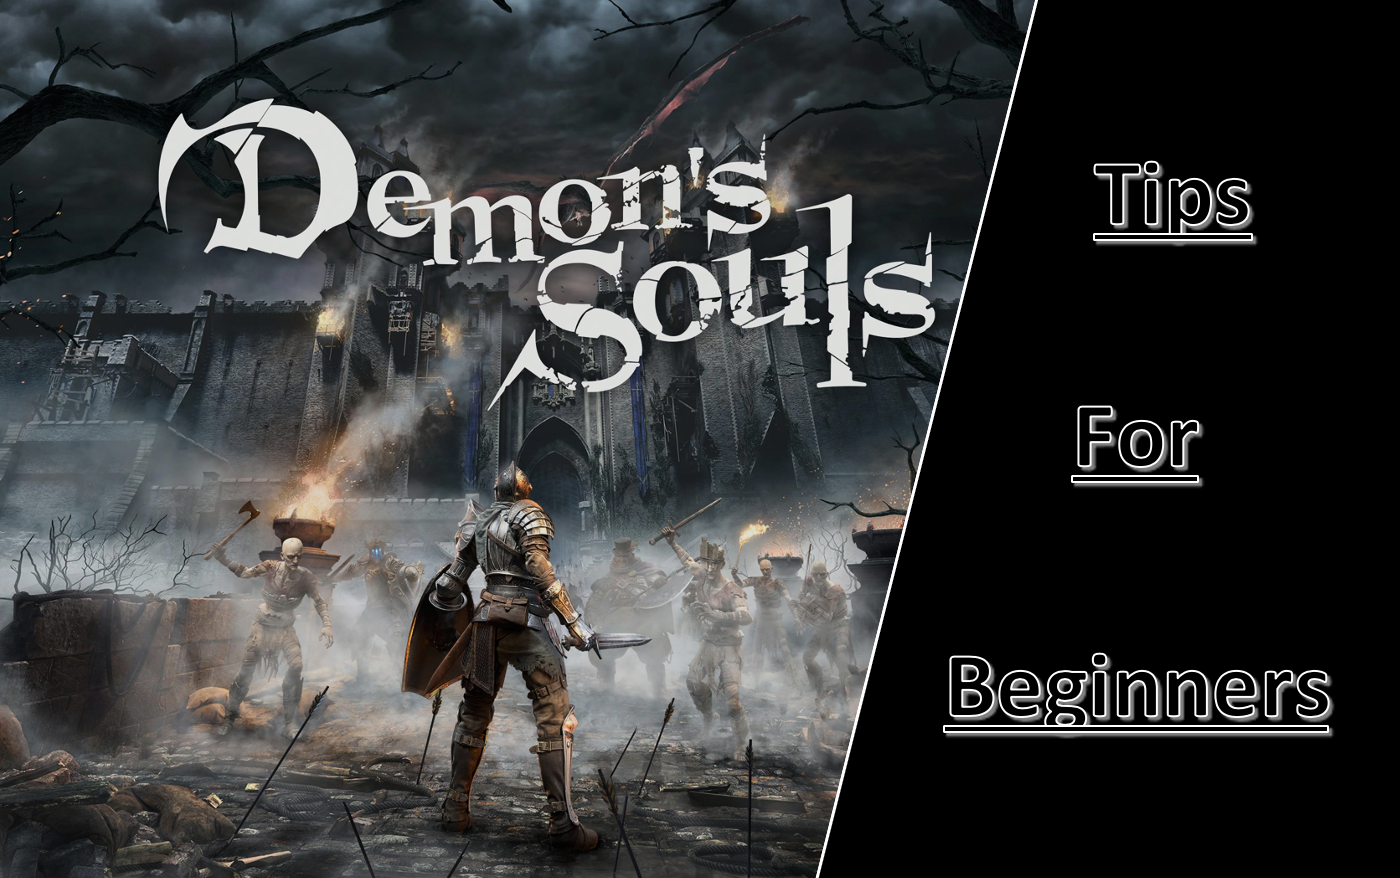 Demon's Souls game tips for beginners - PlayStation (US)